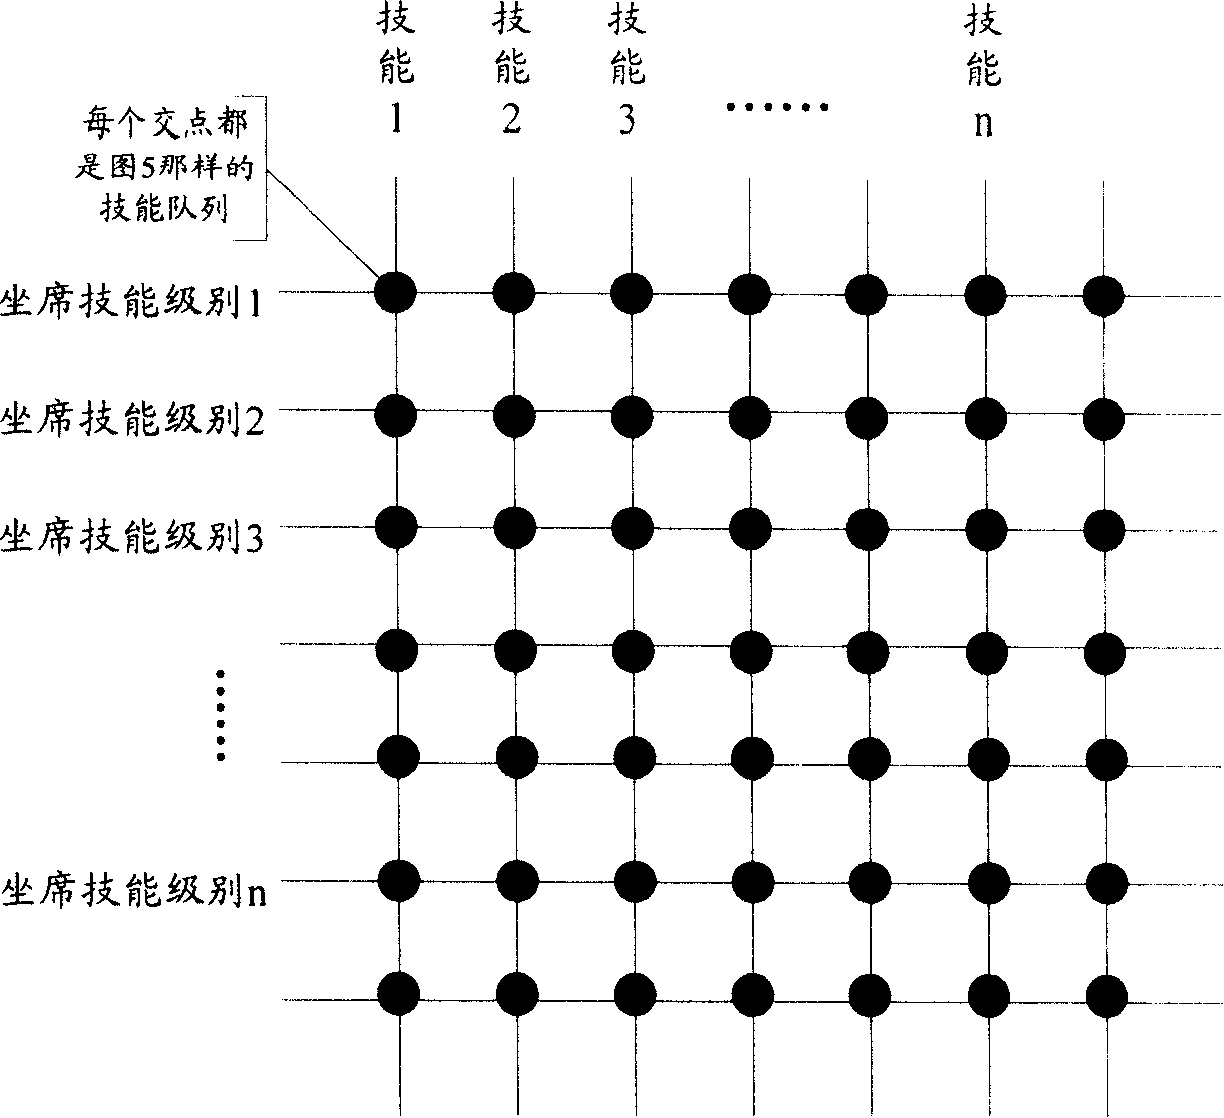 Layered service route system of customer service system